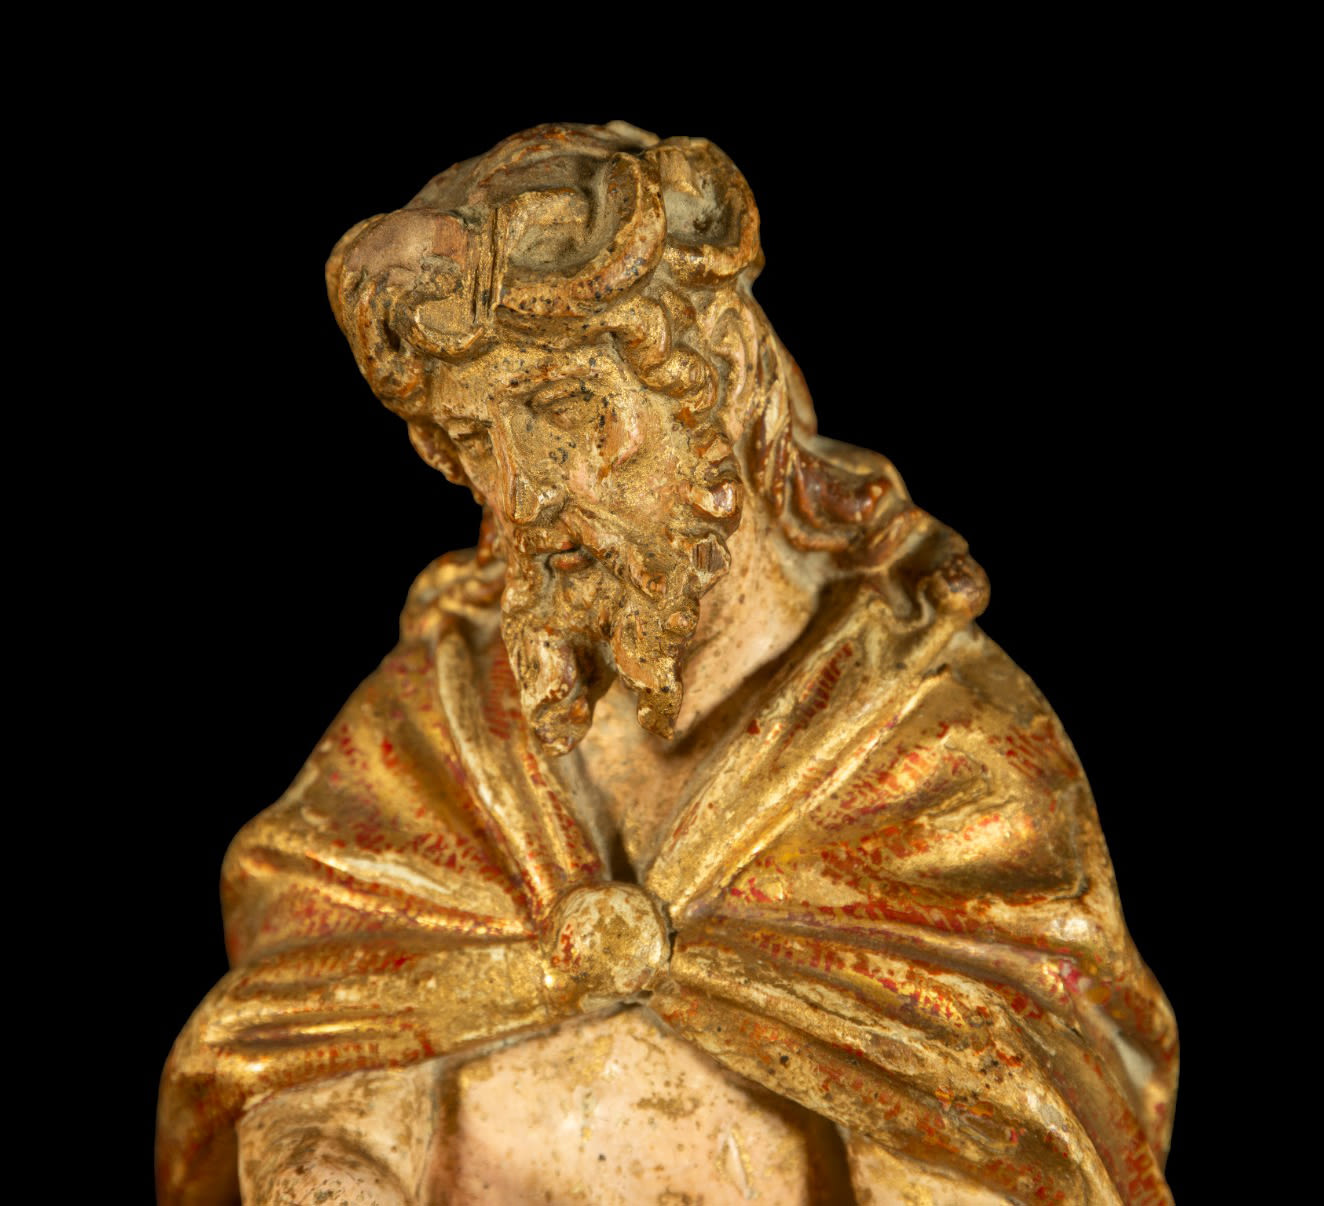 Exceptional 15th century Gothic Christ "Poupée" of Malines , Belgium, late 15th century work - Image 6 of 6